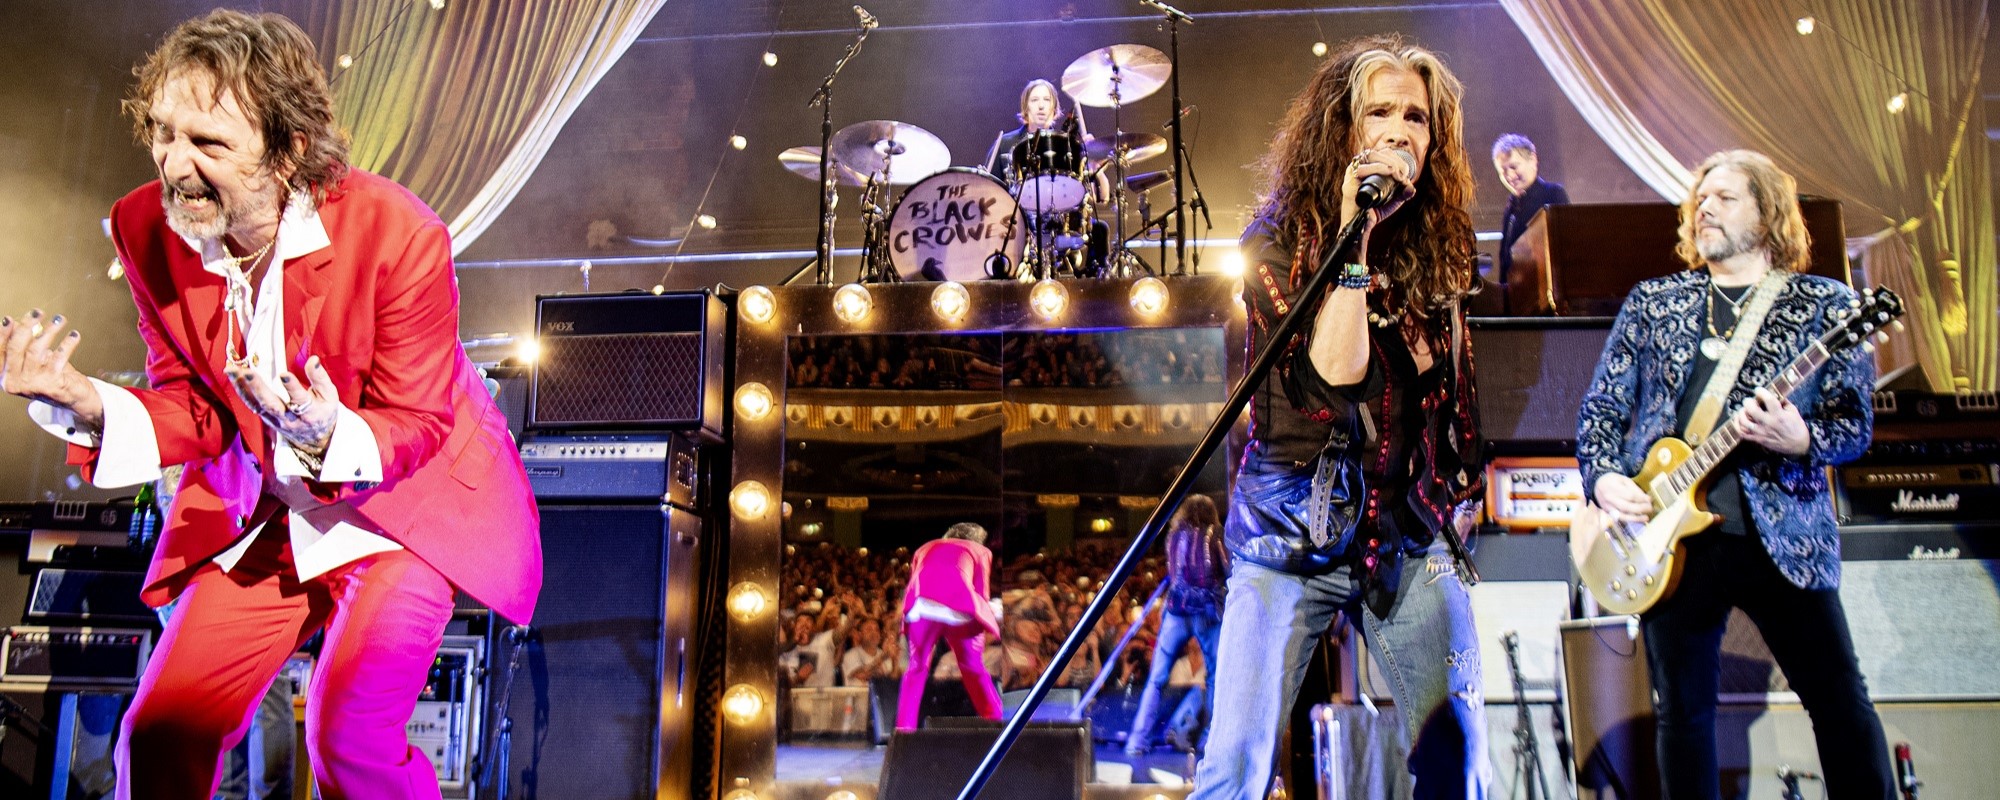 Watch Steven Tyler’s First Live Performance Since Damaging His Vocal Cords as Aerosmith Star Joins the Black Crowes on Stage